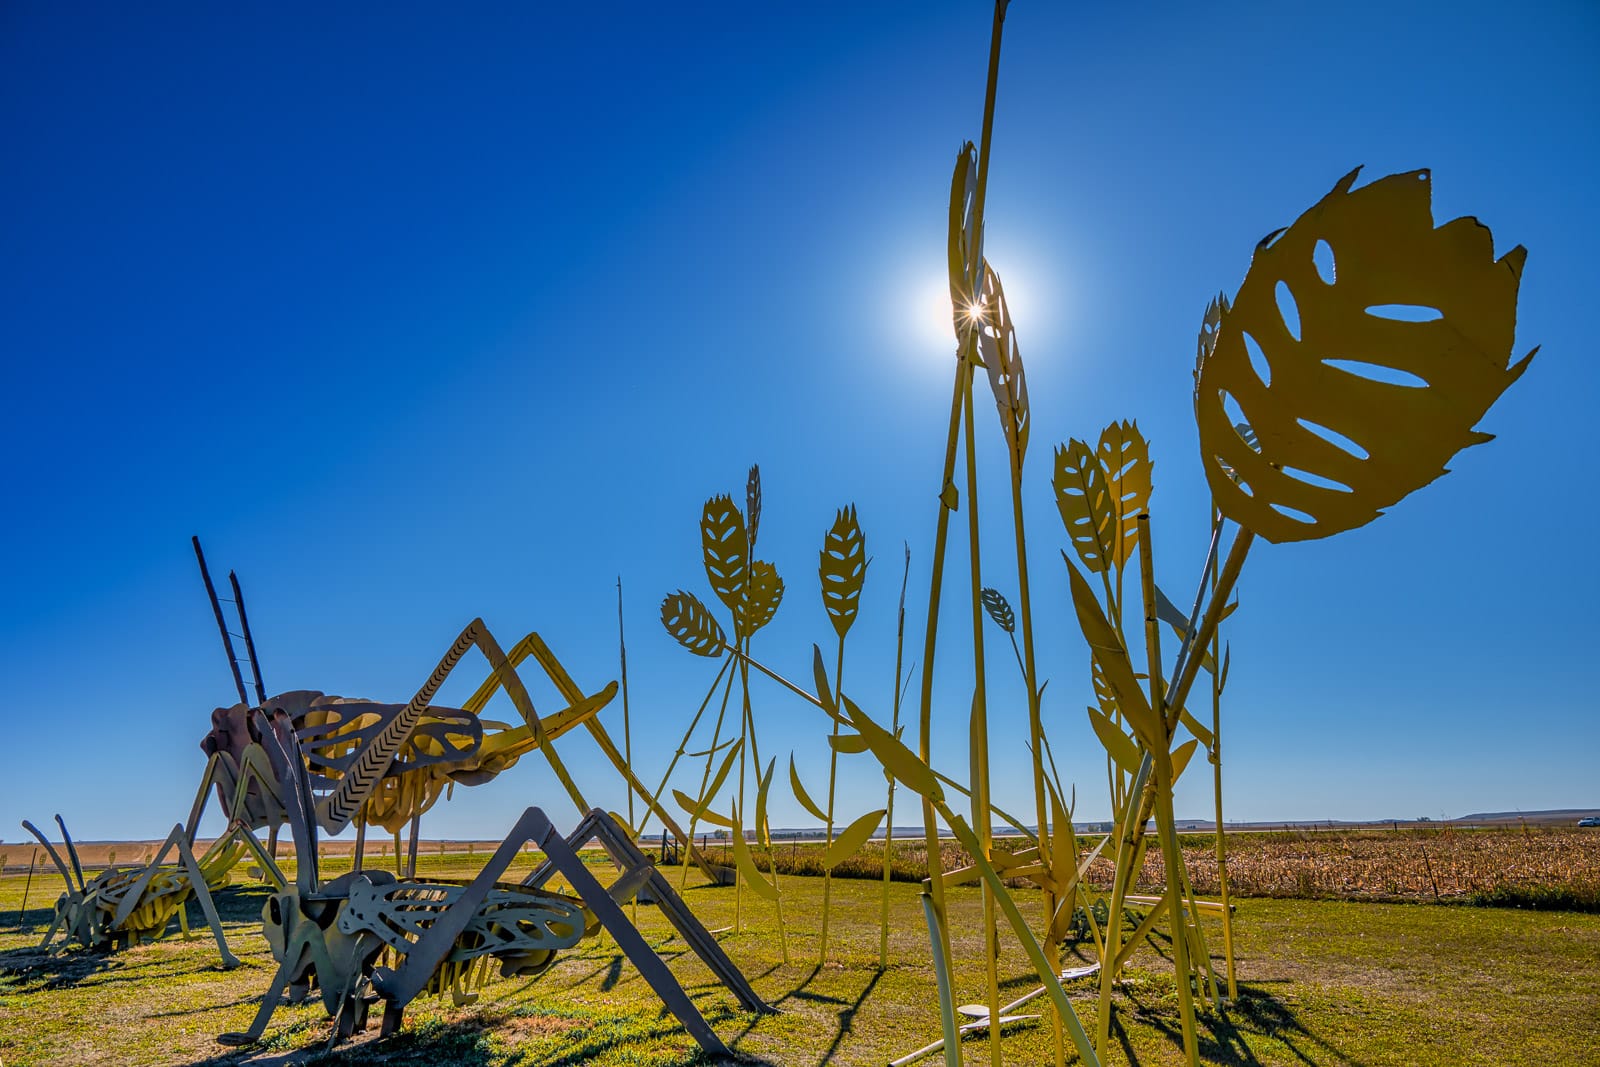 This is a view of the back of thesculpture by Gary Greff, called Grasshoppers in the Field, featuring the shock of wheat. It is located along the Enchanted Highway, between I-94 and Regent, North Dakota.